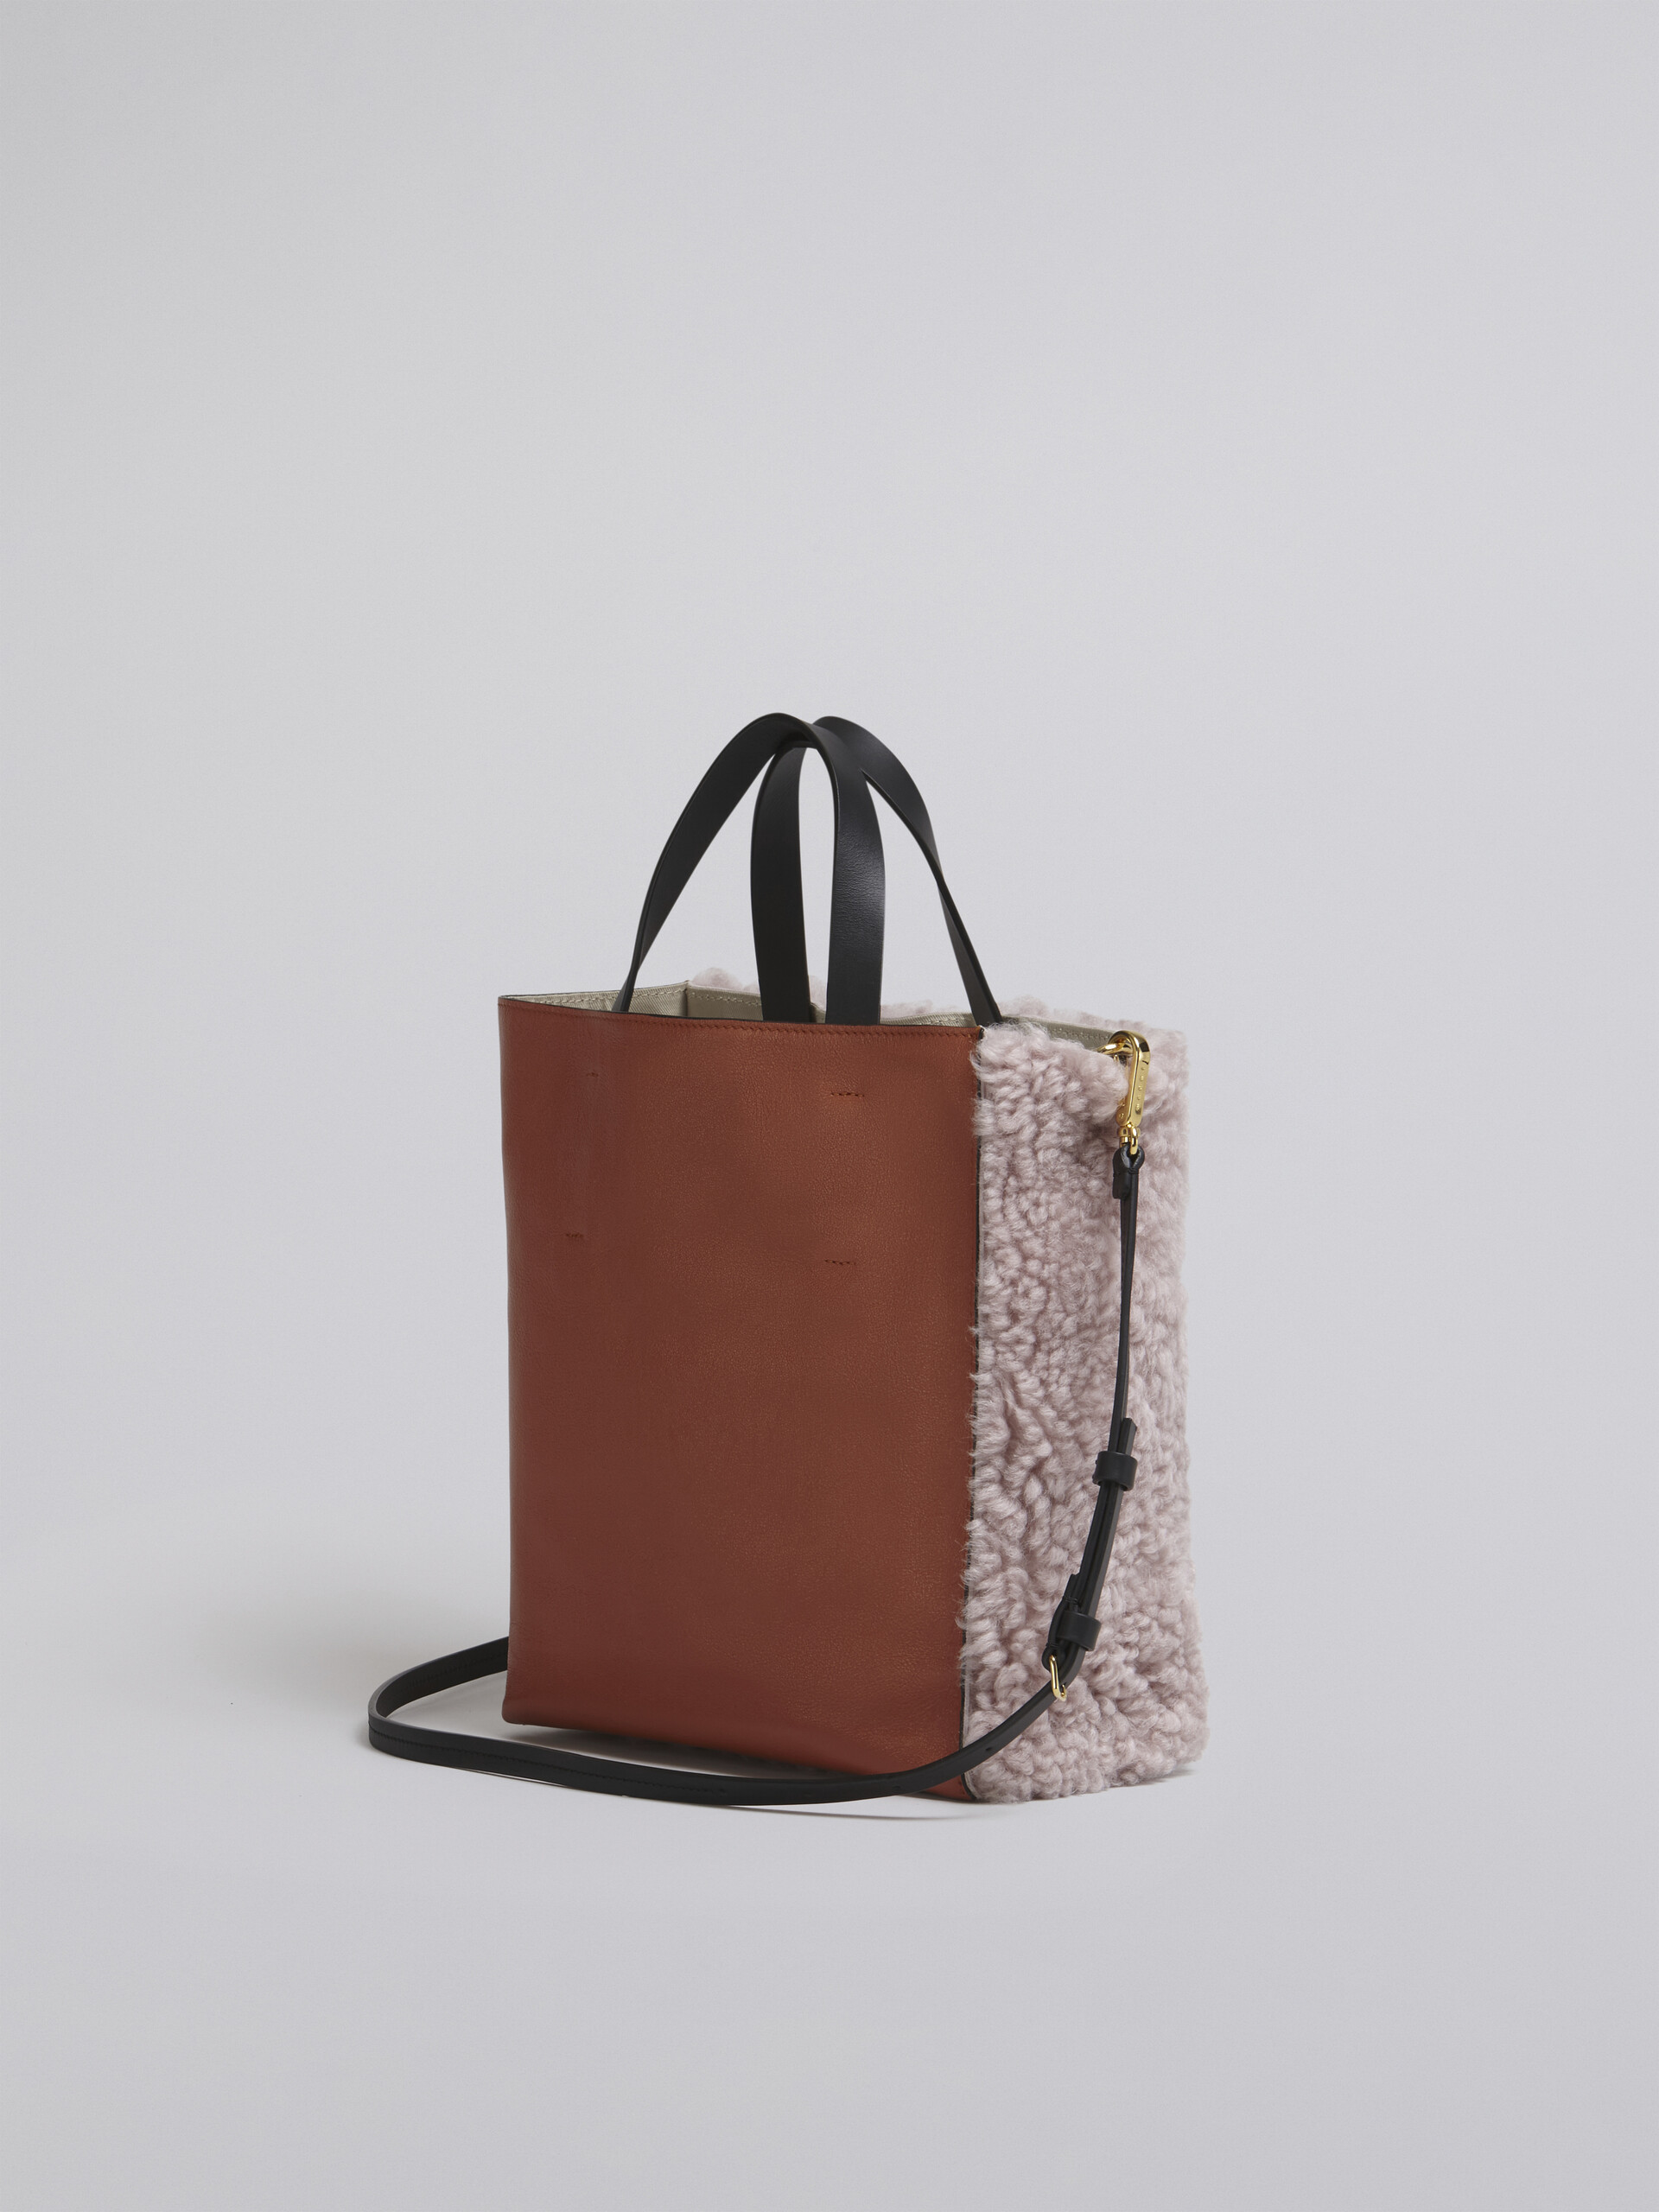 MUSEO SOFT small bag in pnk shearling - Shopping Bags - Image 2